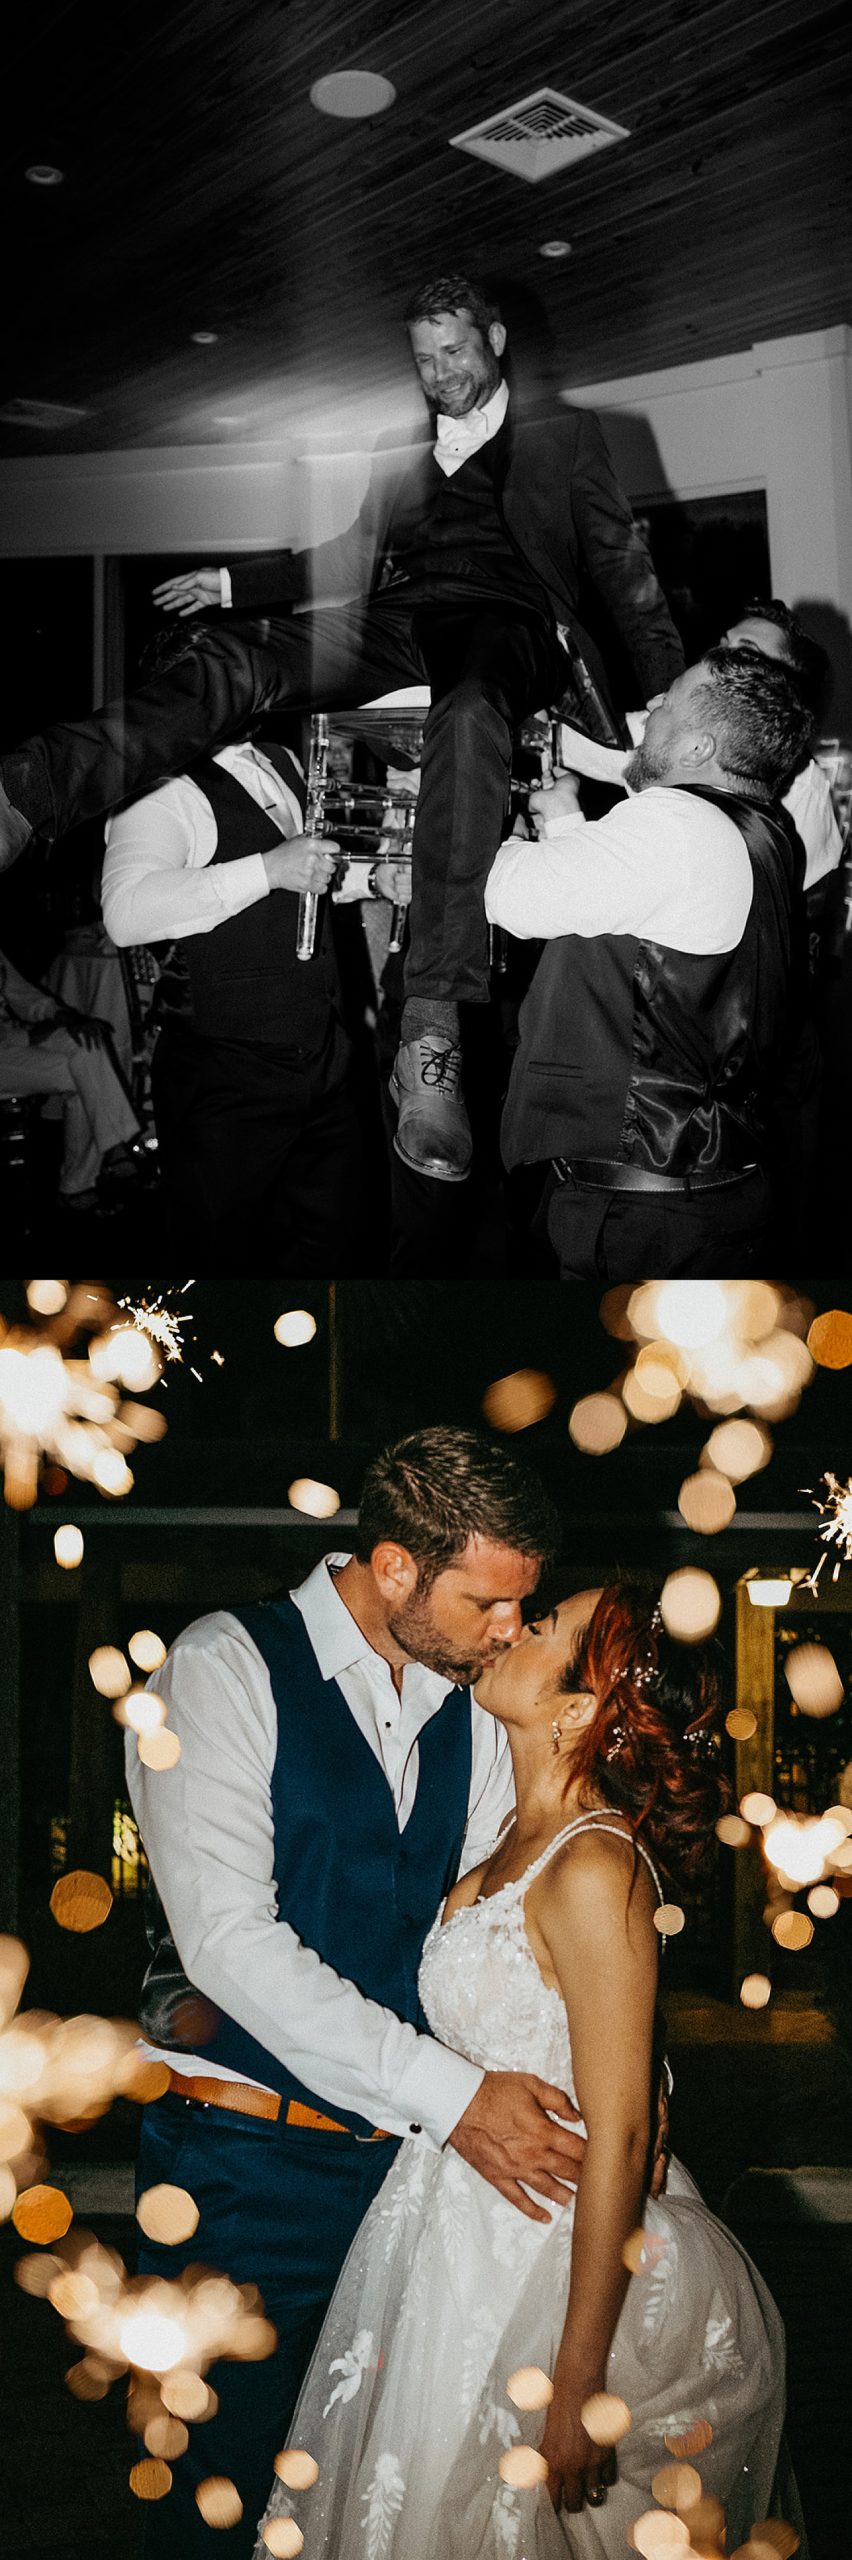 Groom gets thrown up on chair in the air at wedding reception with sparklers at reception